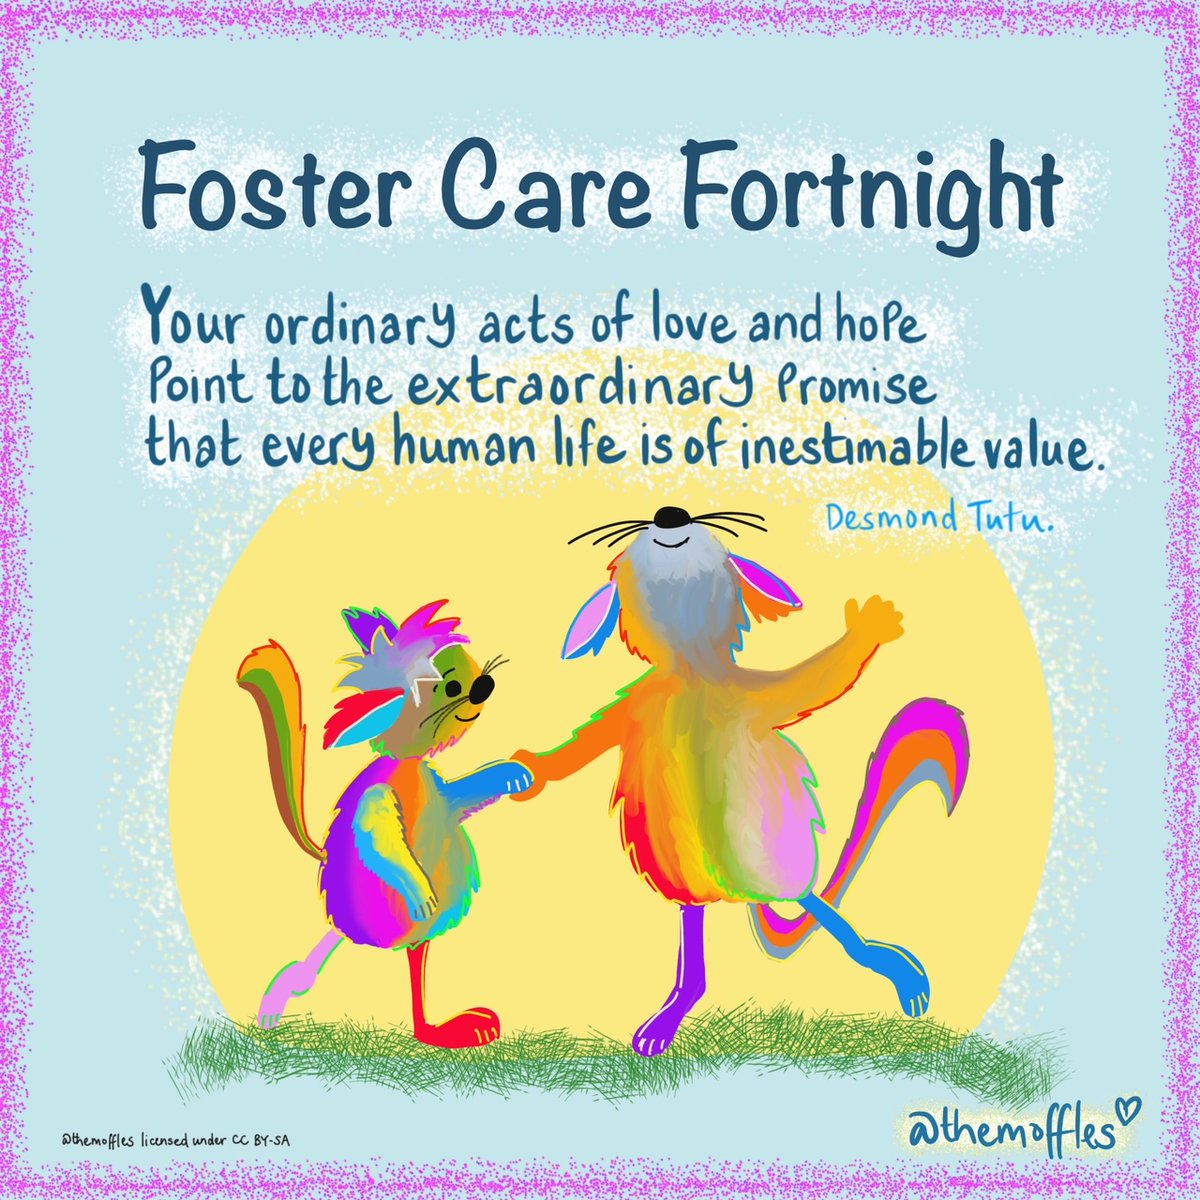 🌈 Thank you foster carers & fostering communities for all that you do 🐾💕 #Fostering #FosteringTheFuture #fosteringsaveslives #fostercare #fostercarefortnight #FCF22 #ThankYou #community #PACE #love